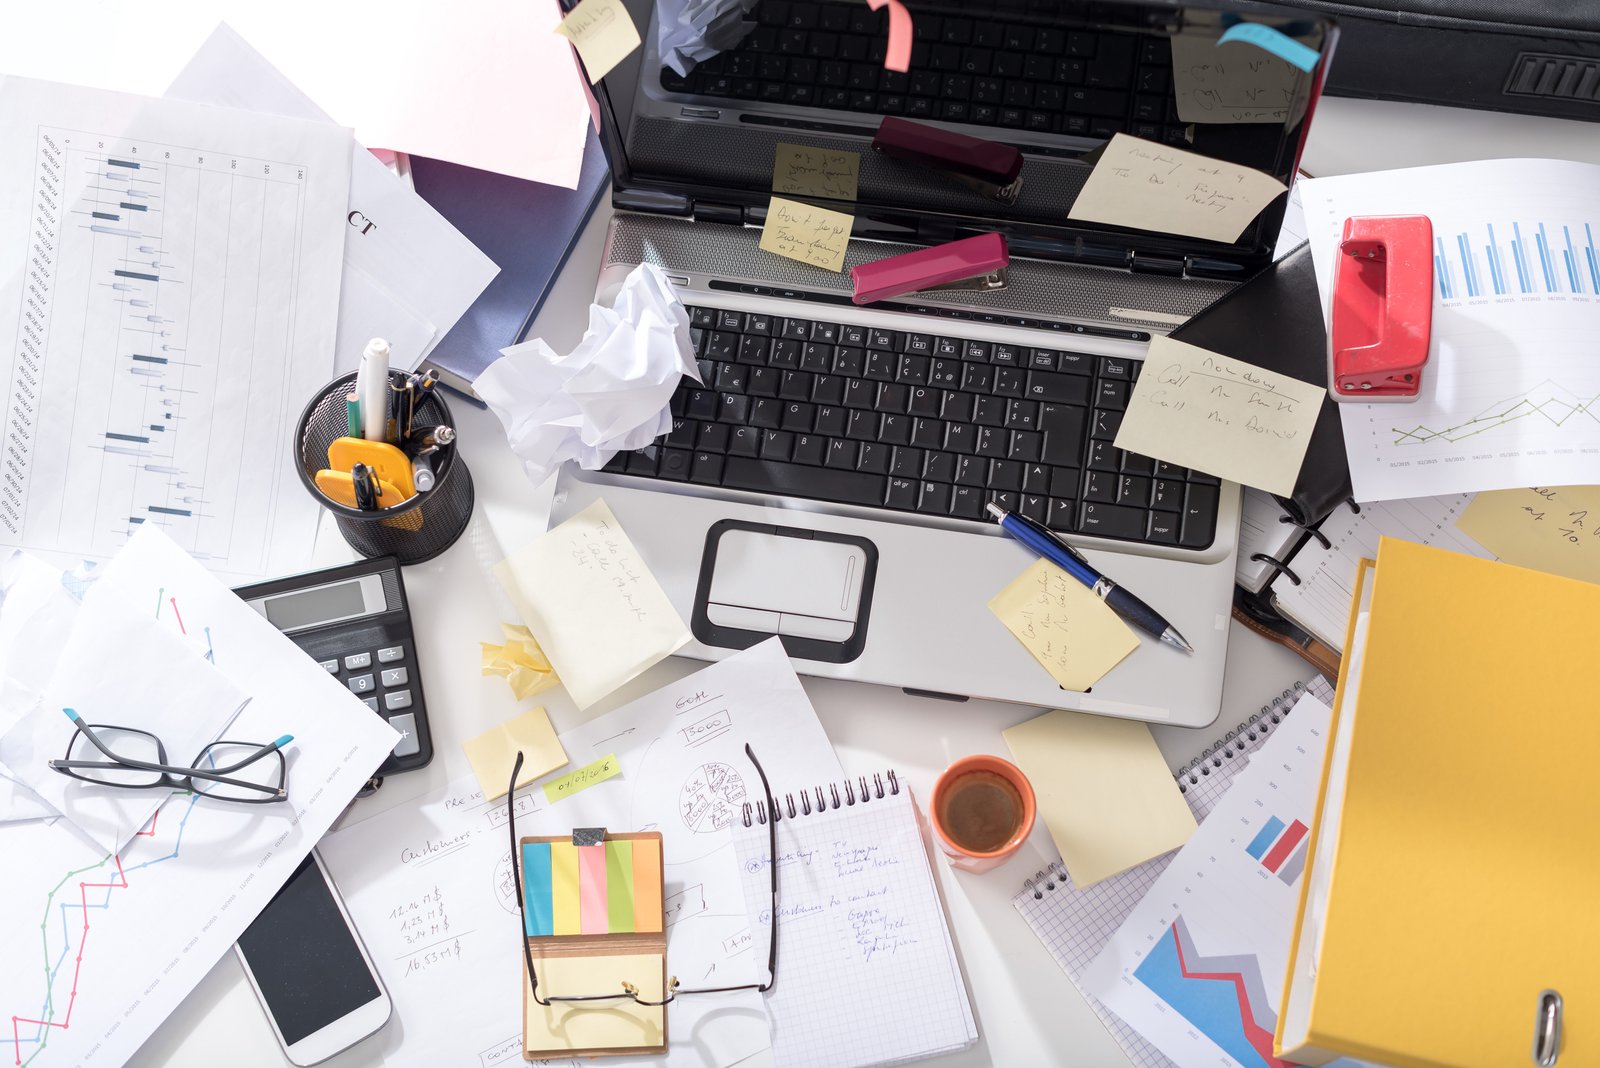 stuck in a rut - how to get unstuck - Messy and cluttered office desk